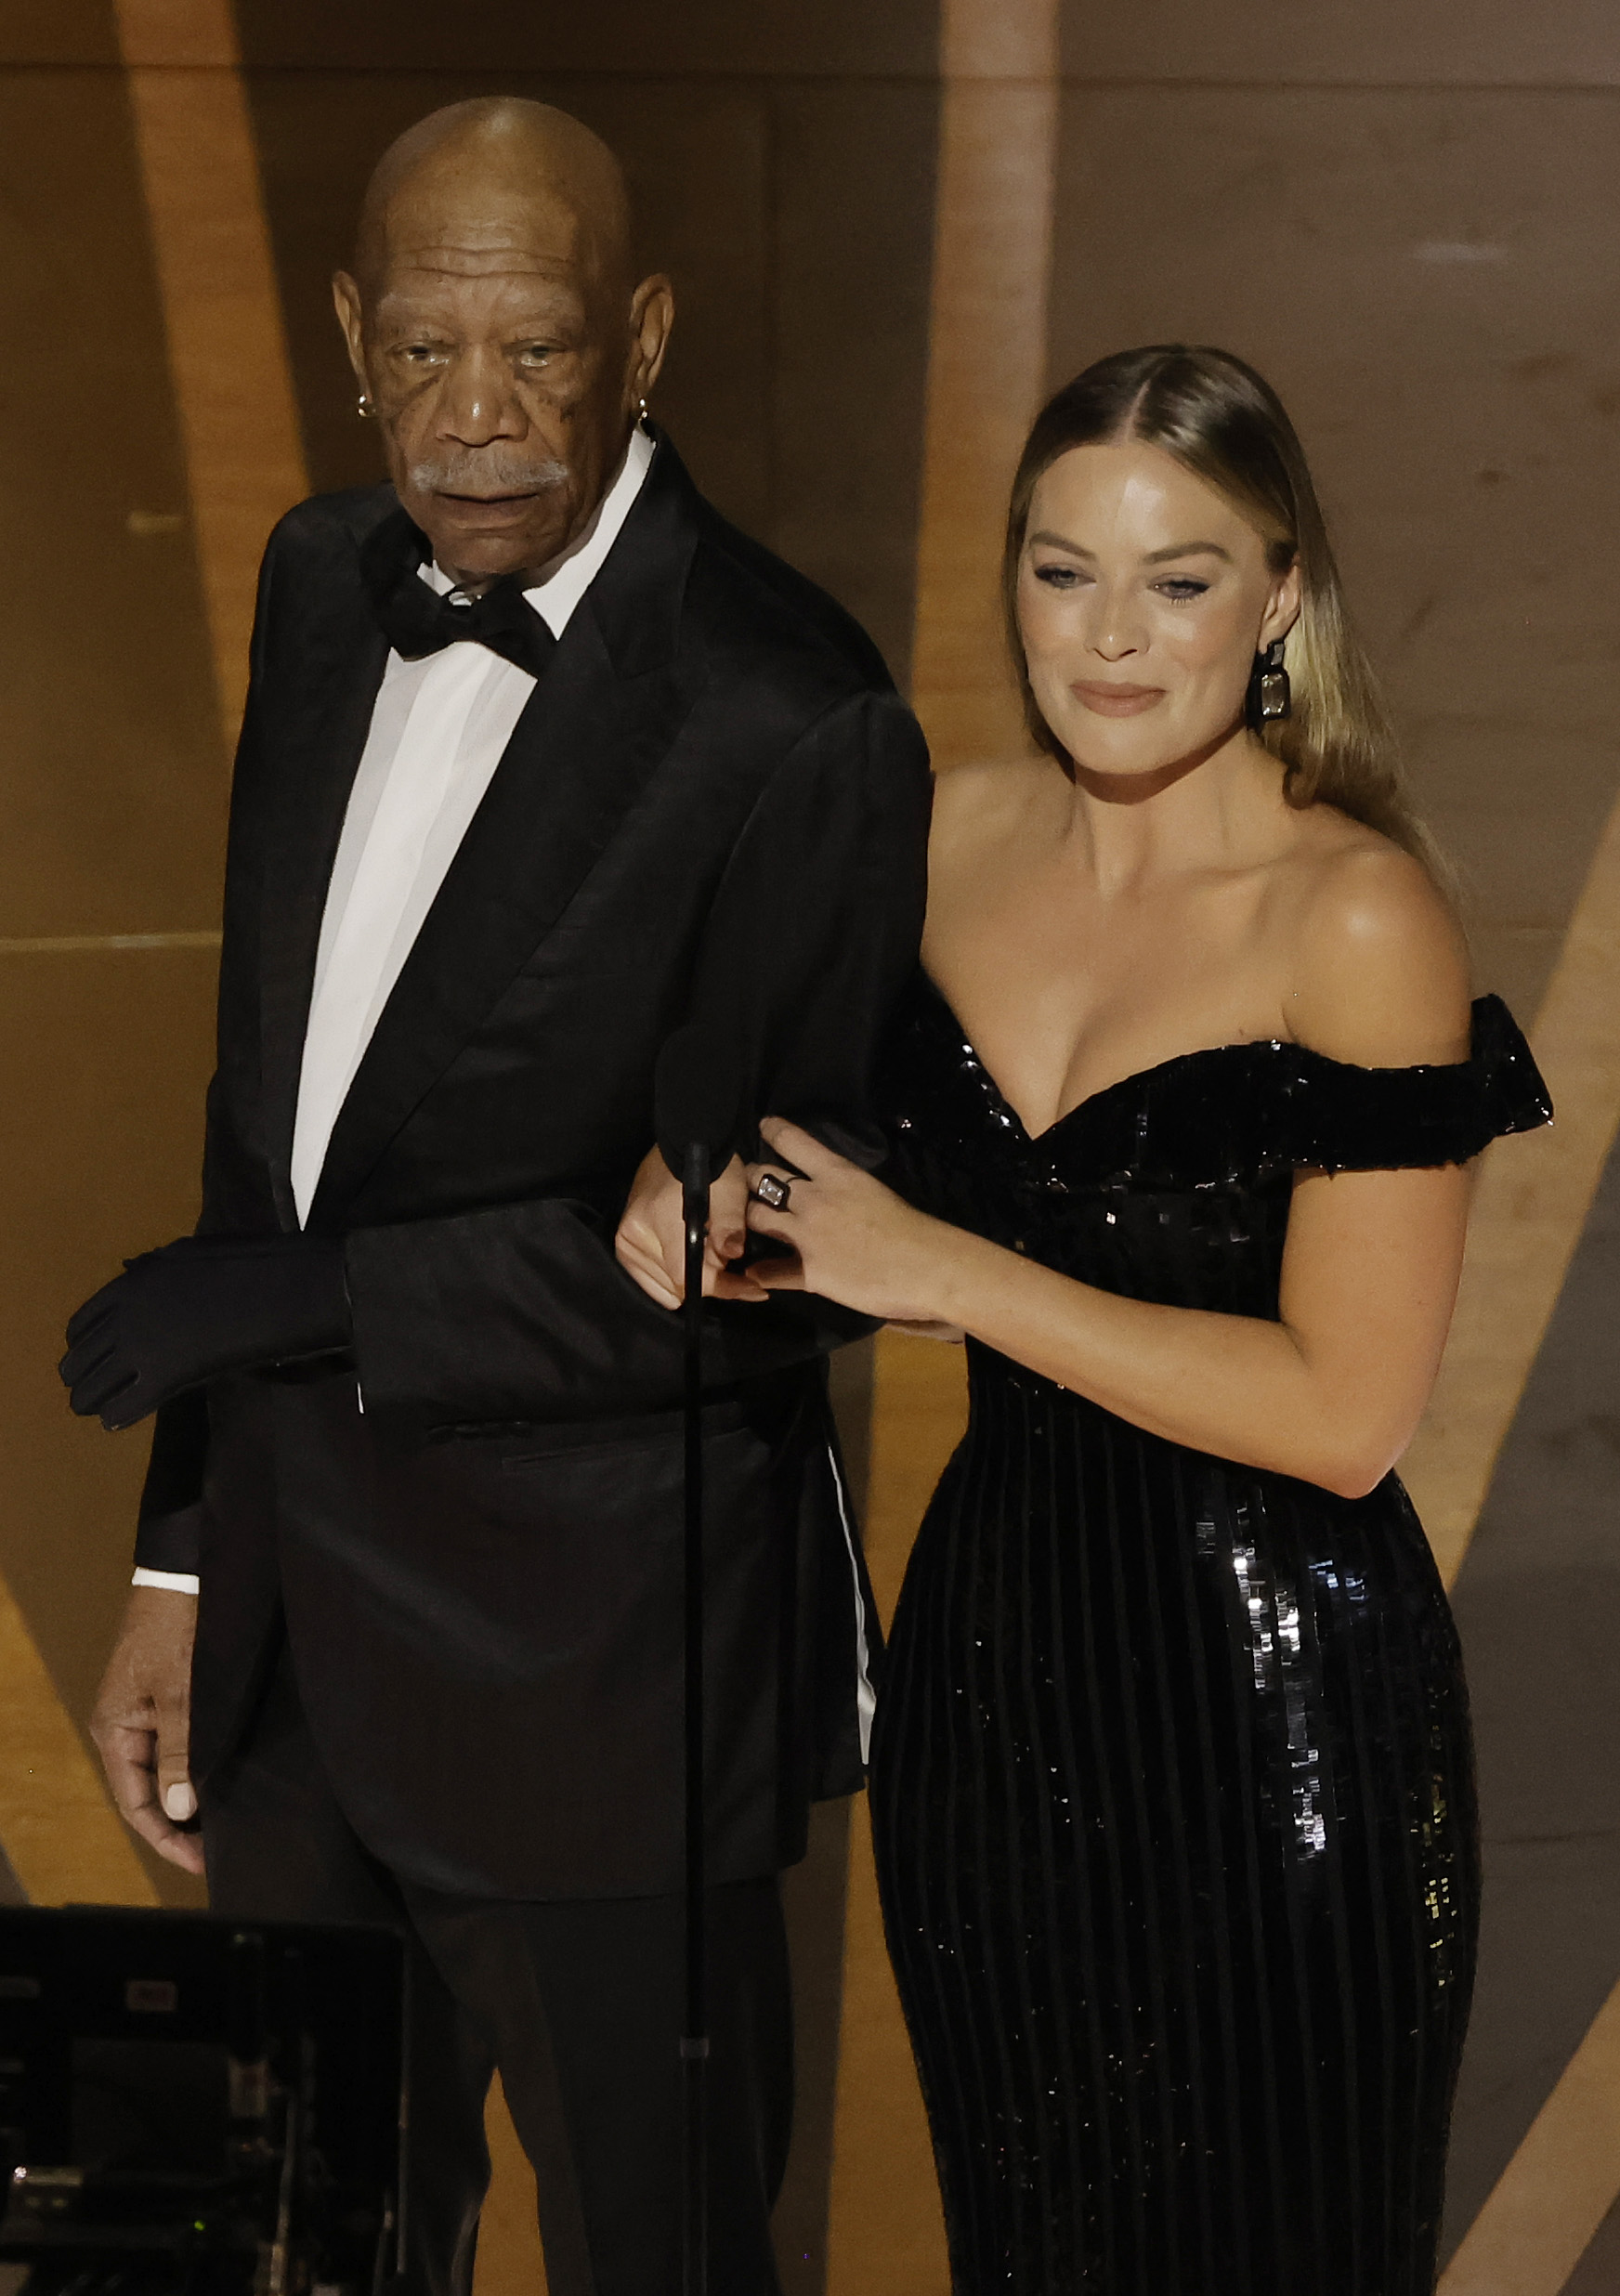 Why Freeman wore glove on his left hand at the Oscars